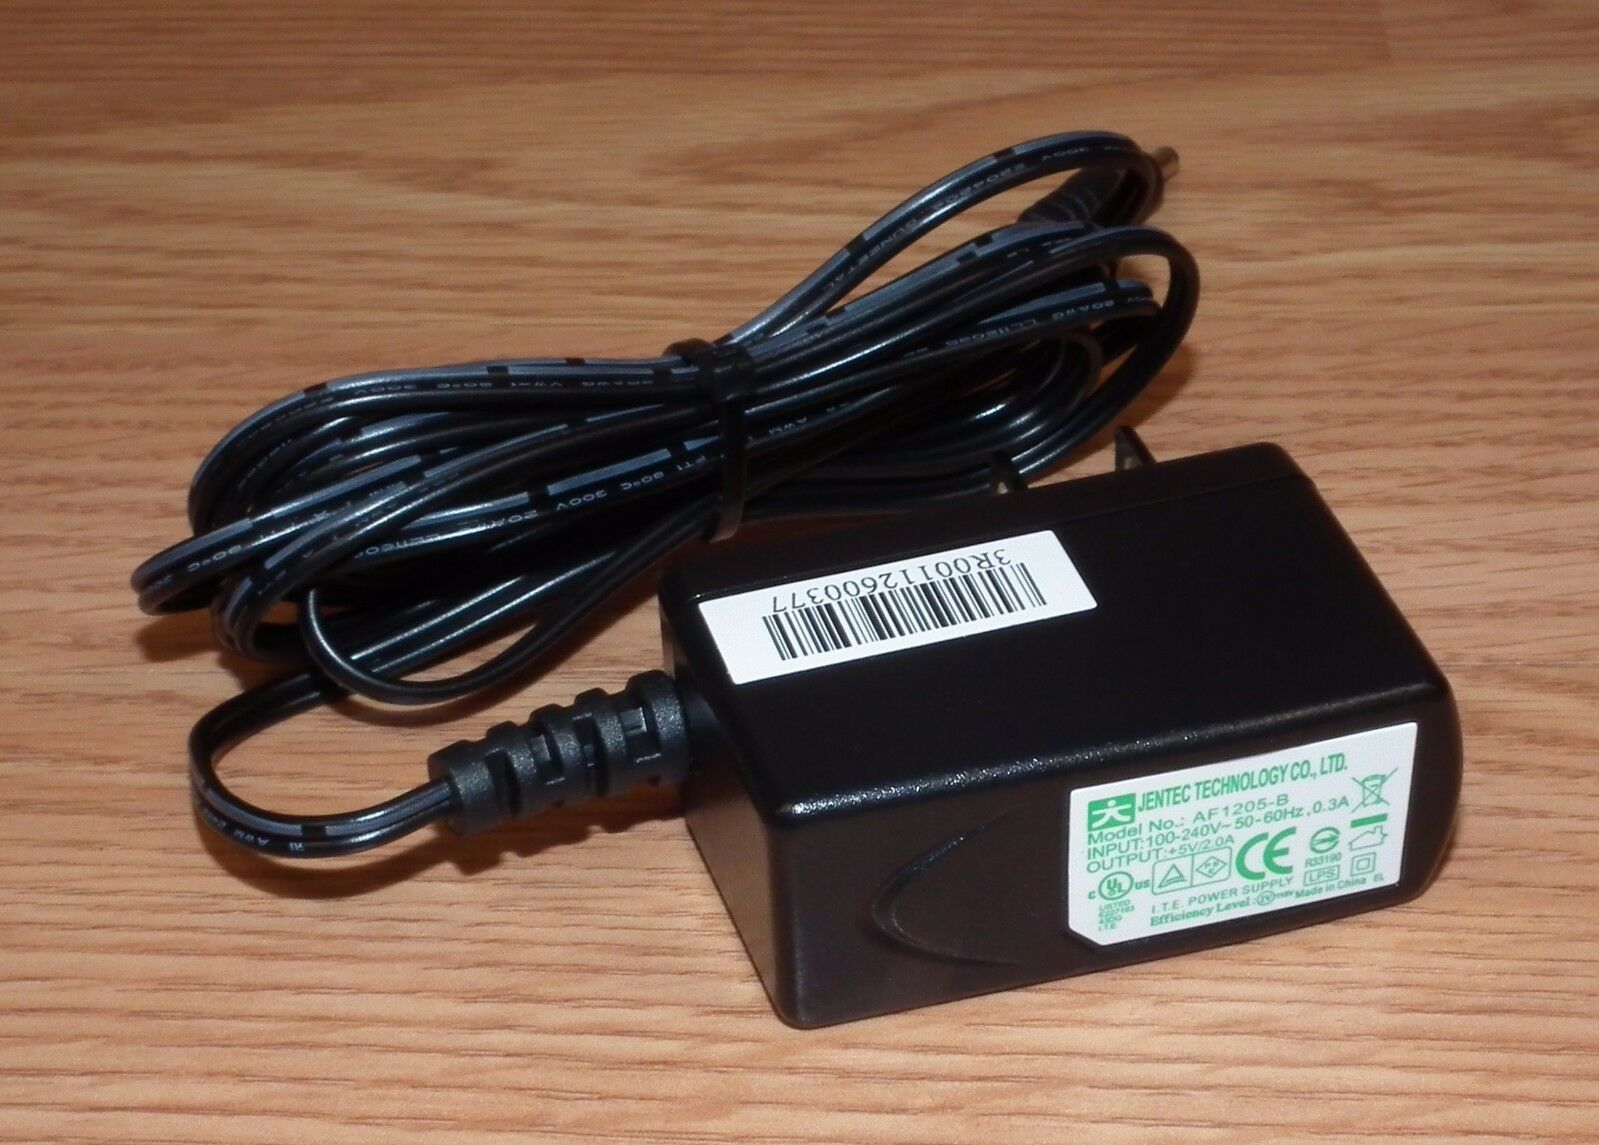 Genuine Jentec (AF1205-B) 5V 2.0A 50-60Hz AC Adapter Power Supply Charger Country/Region of Manufacture: China Type: - Click Image to Close